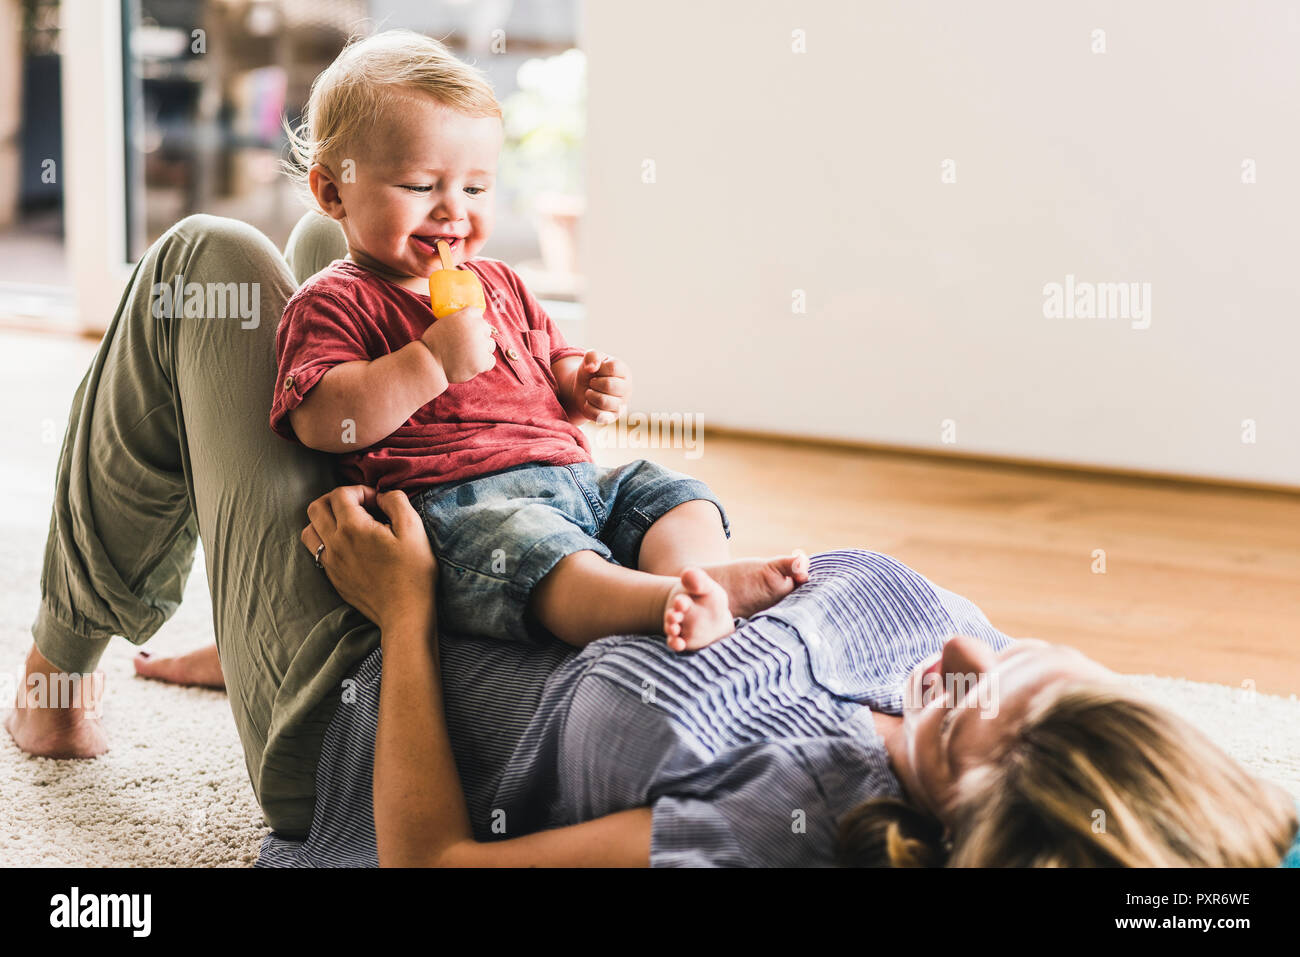 Mother and son at home eating ice lolly Stock Photo